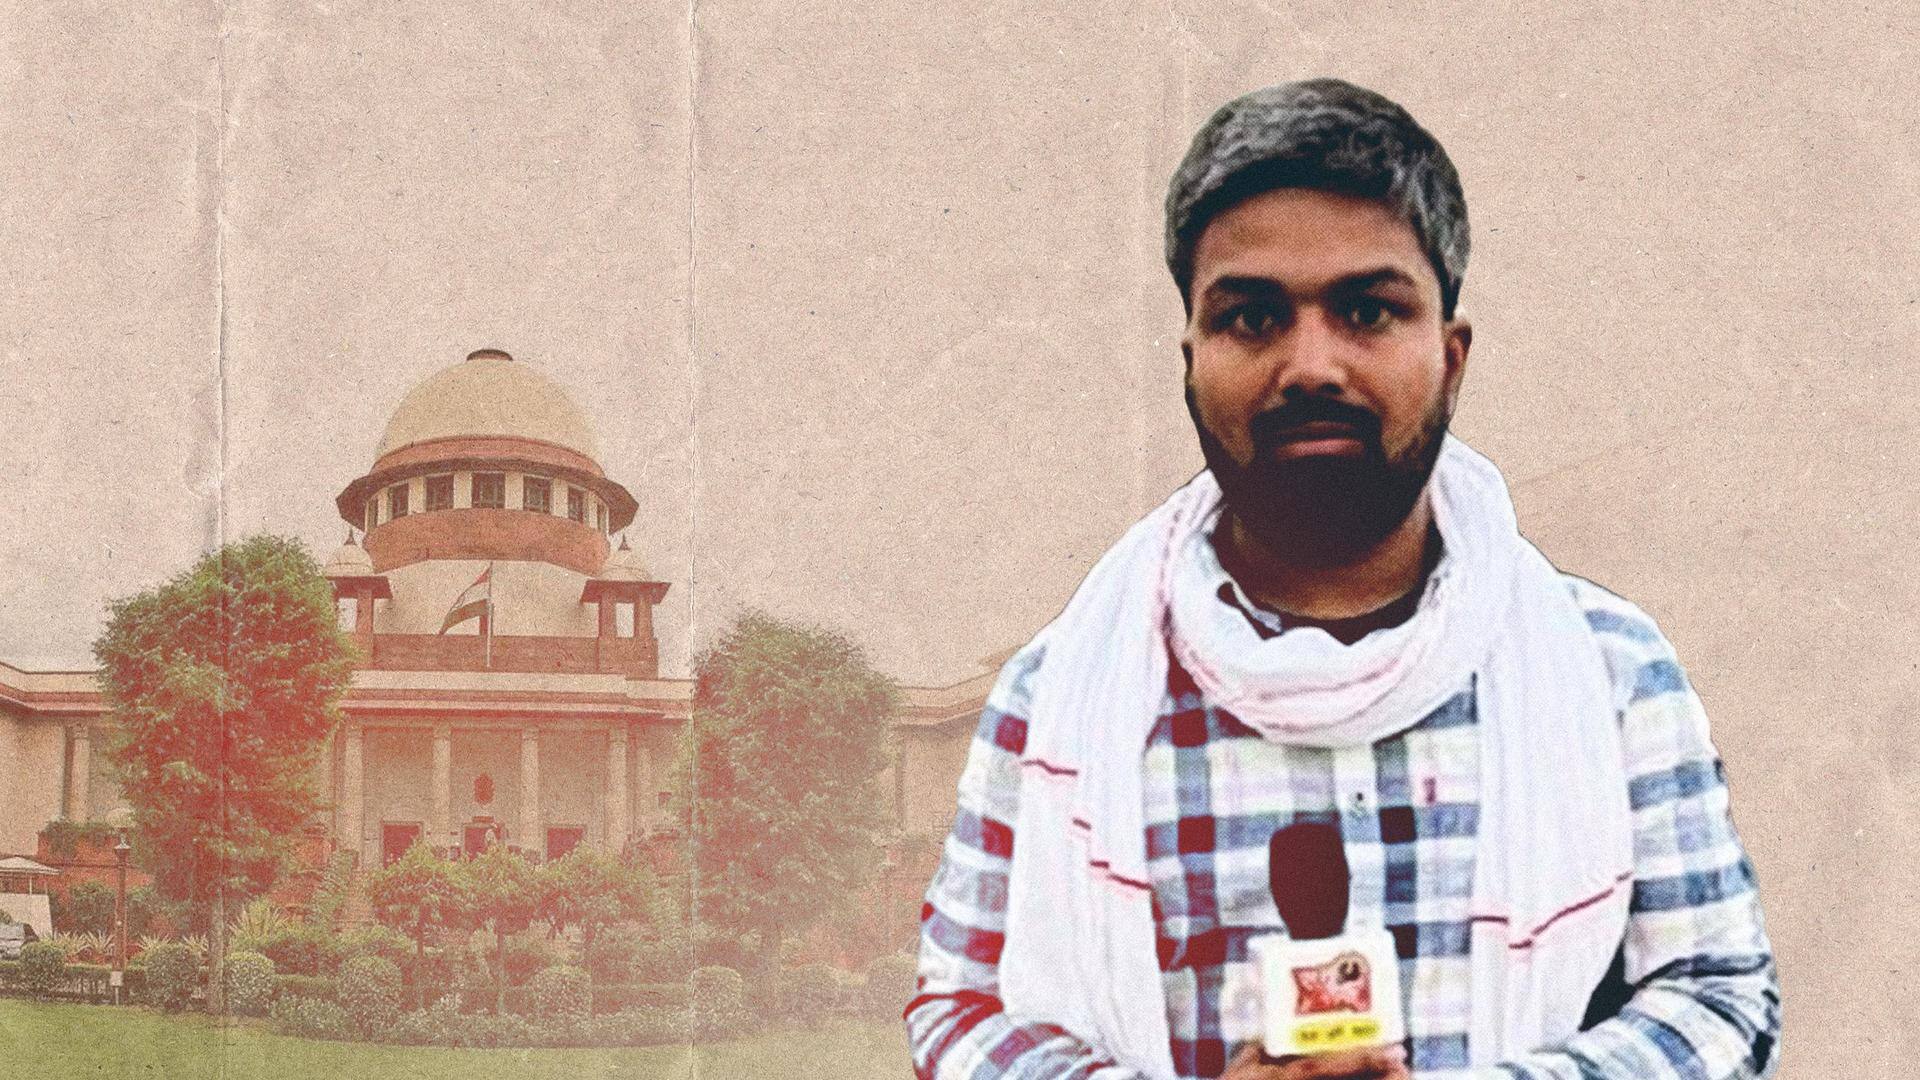 SC junks Manish Kashyap's plea: What the case is about